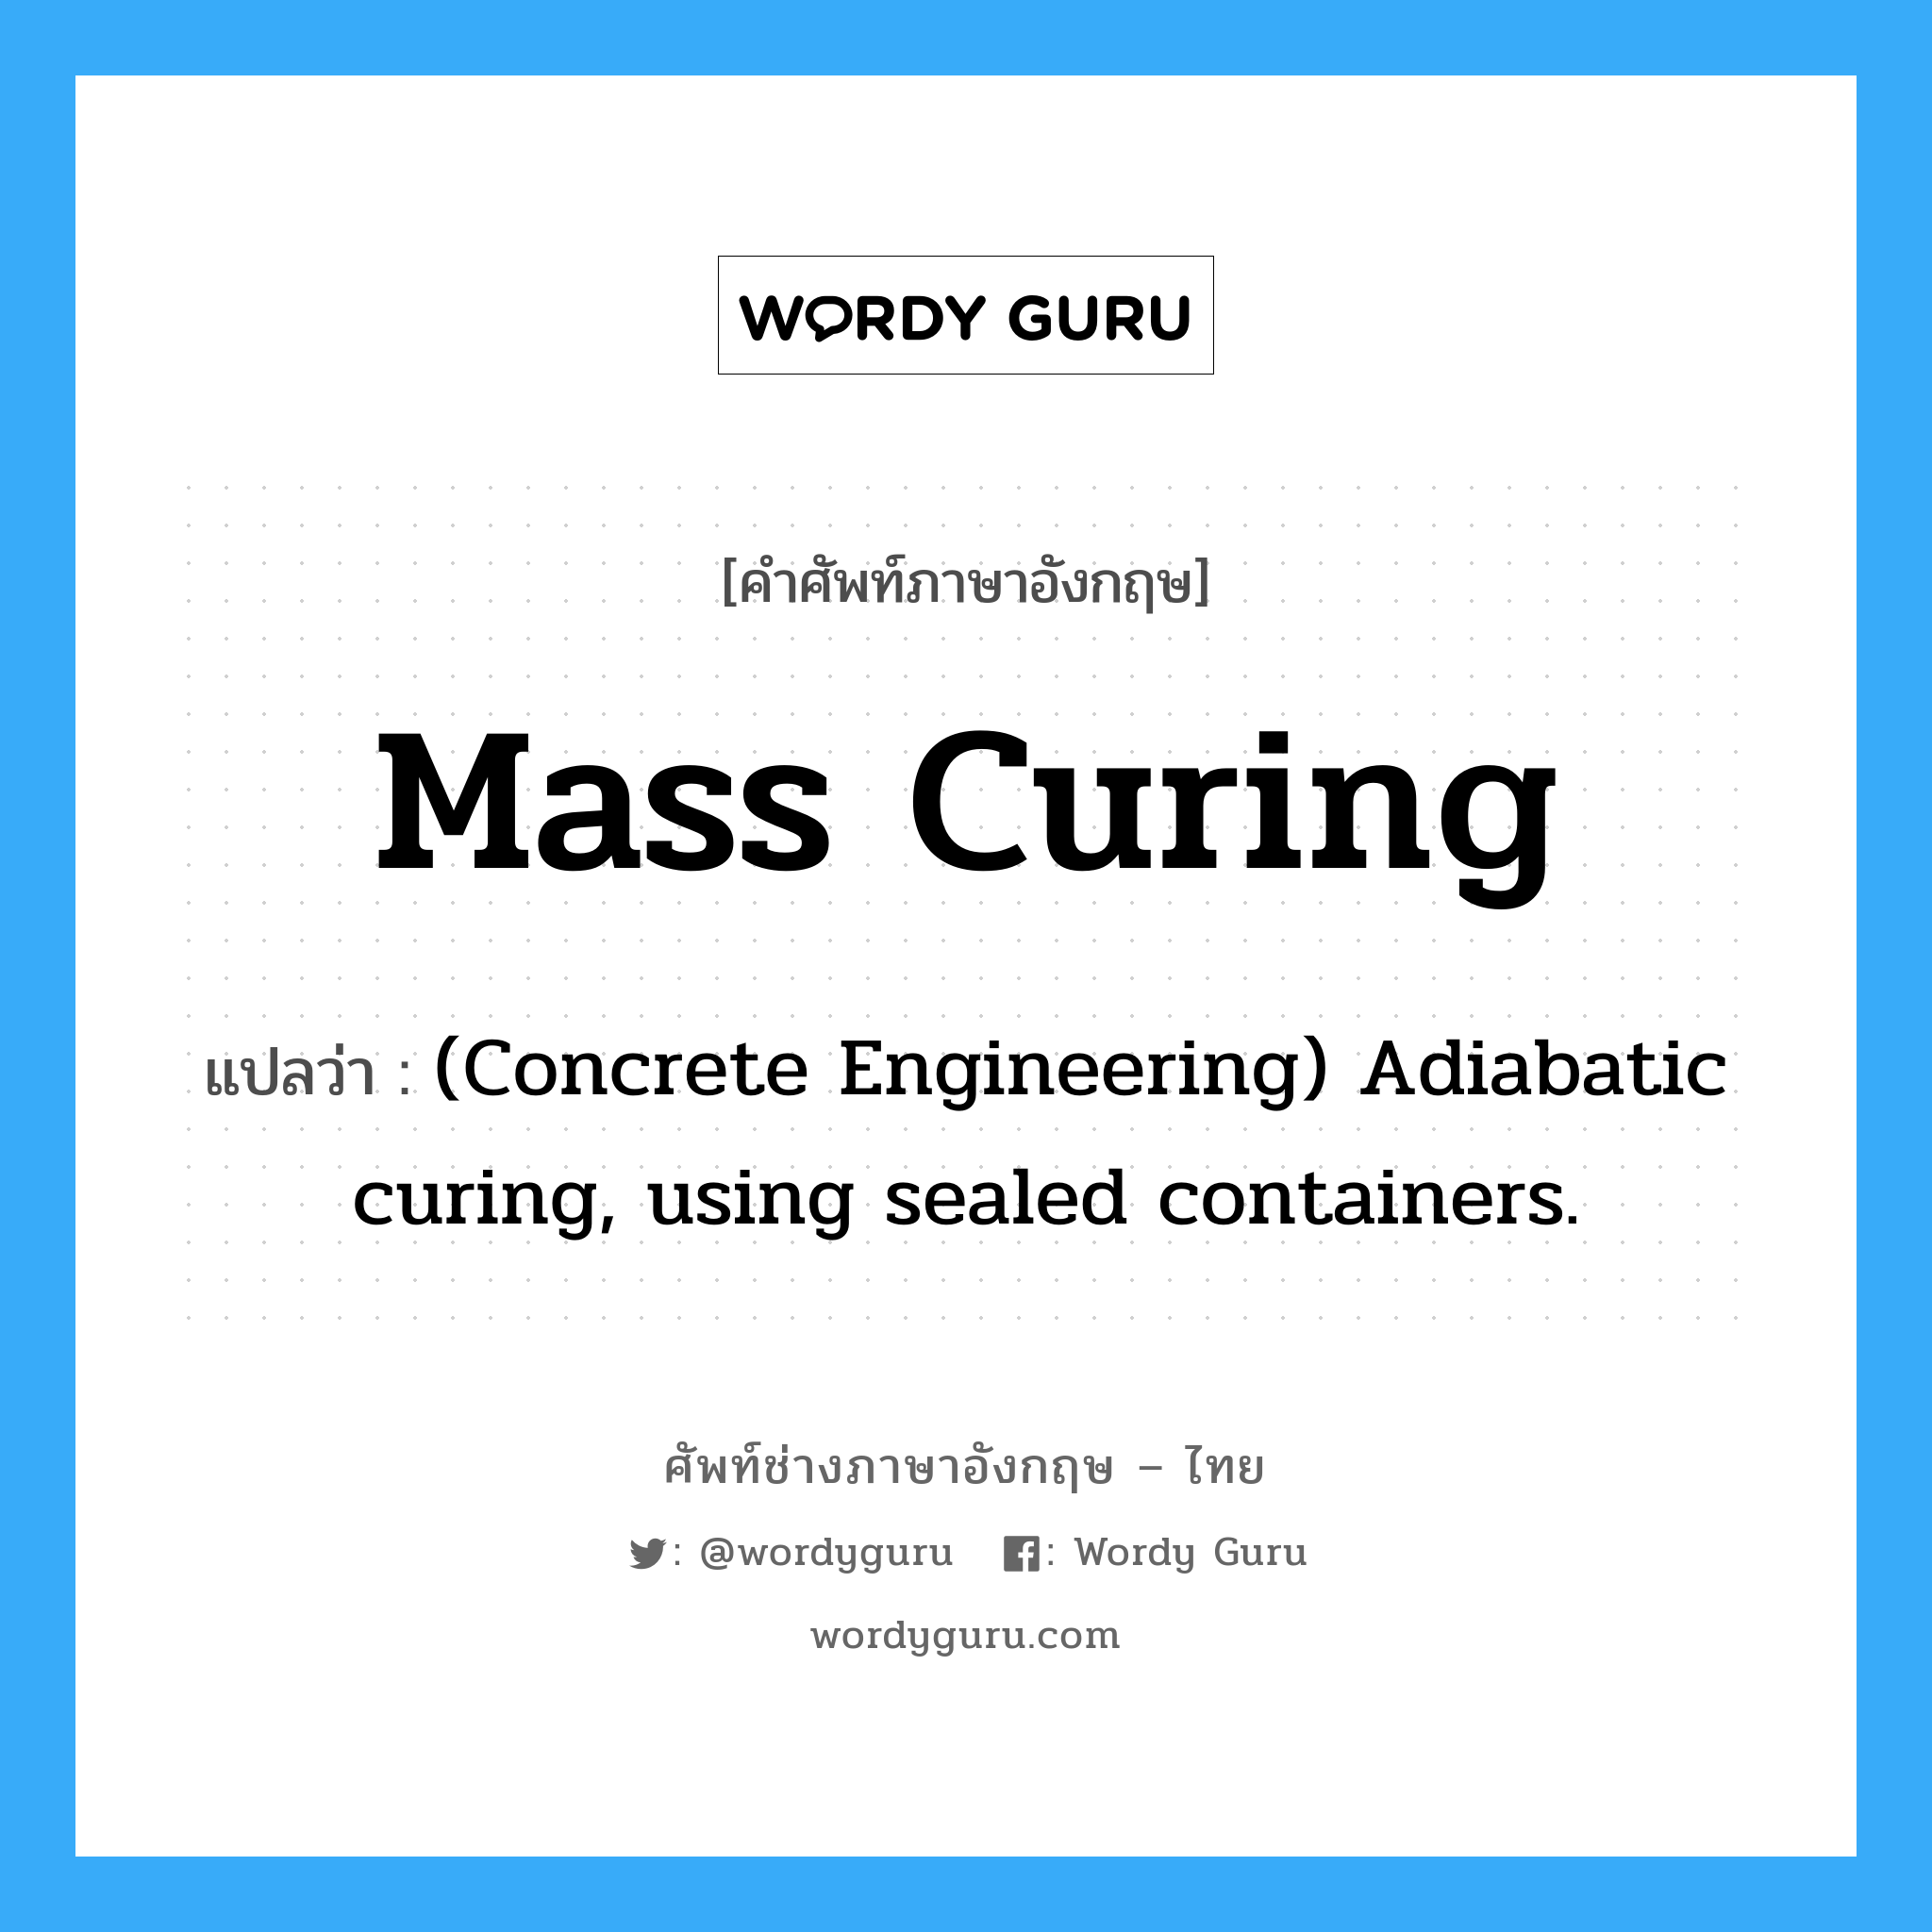 Mass Curing แปลว่า?, คำศัพท์ช่างภาษาอังกฤษ - ไทย Mass Curing คำศัพท์ภาษาอังกฤษ Mass Curing แปลว่า (Concrete Engineering) Adiabatic curing, using sealed containers.